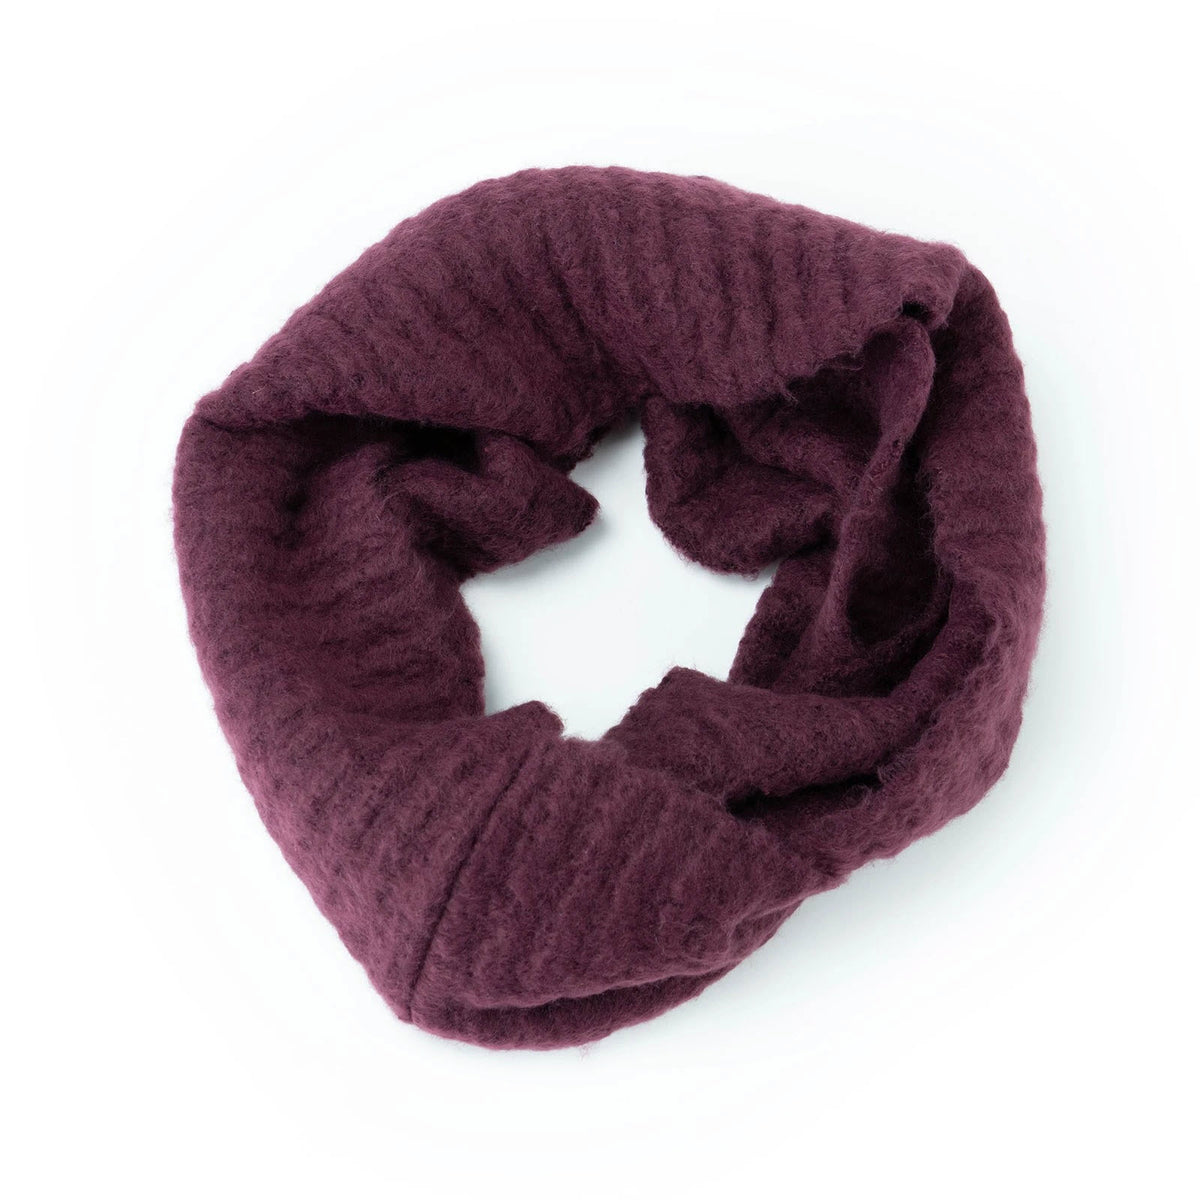 BRITTS KNITS INFINITY SCARF WINE